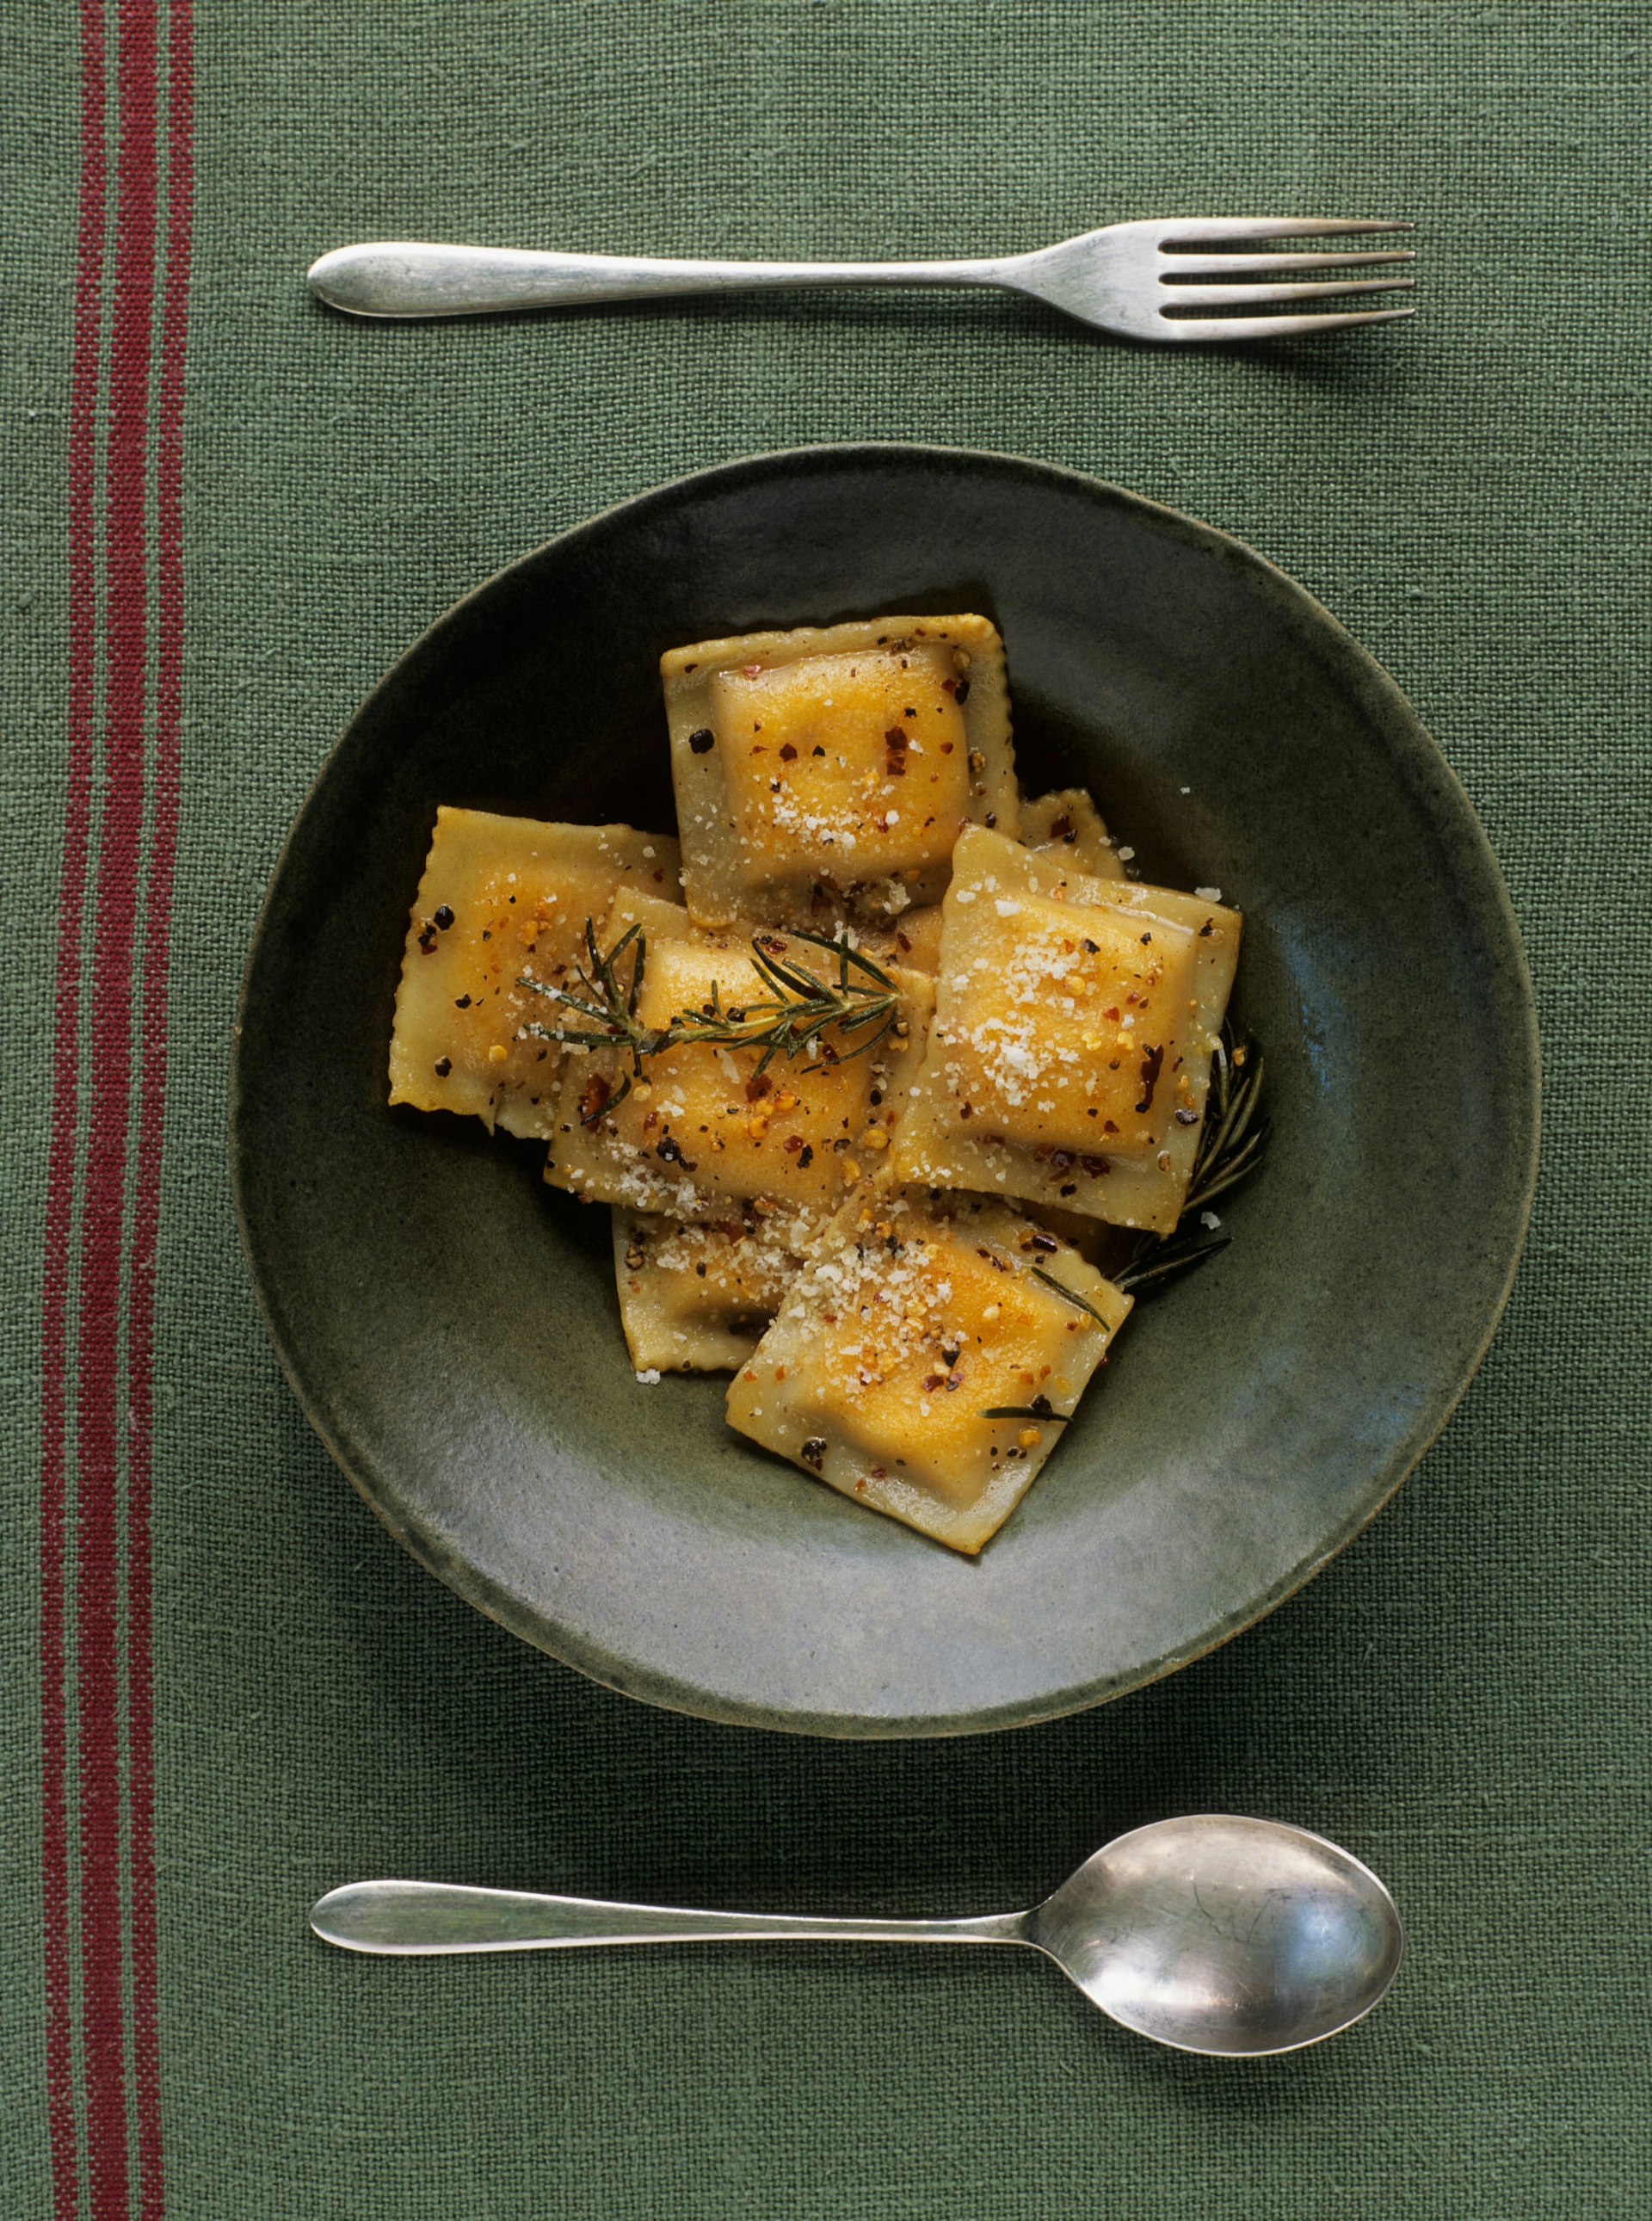 Handmade ravioli - enough to make you drool while trekking in the daal bhaat belt © Ngoc Minh & Julian Wass/Getty Images